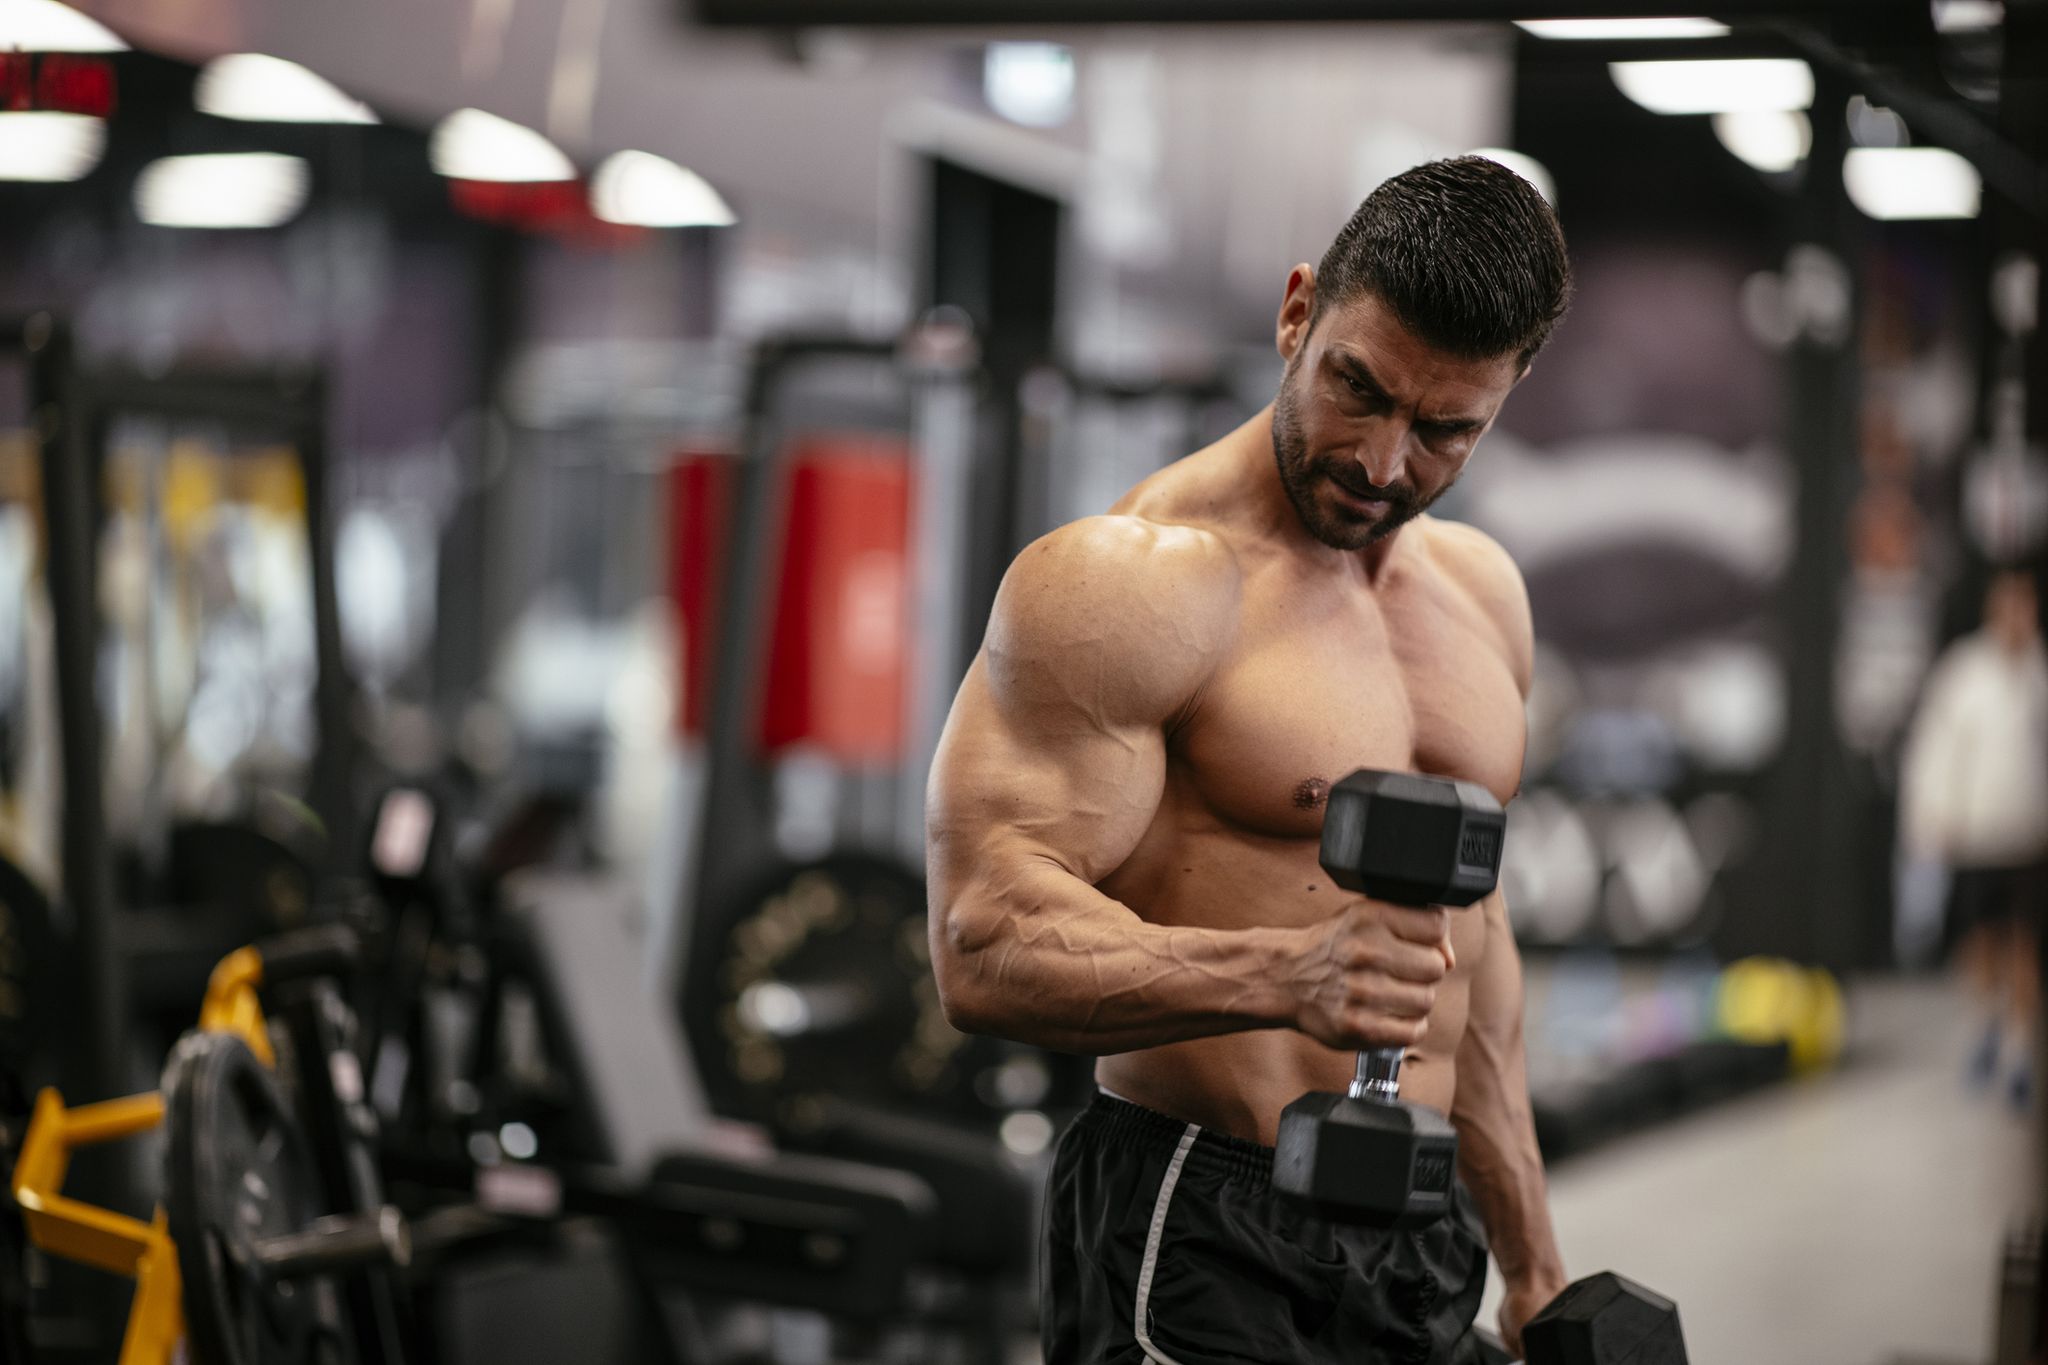 How to Get Bigger Biceps: The 13 Best Arm Workouts